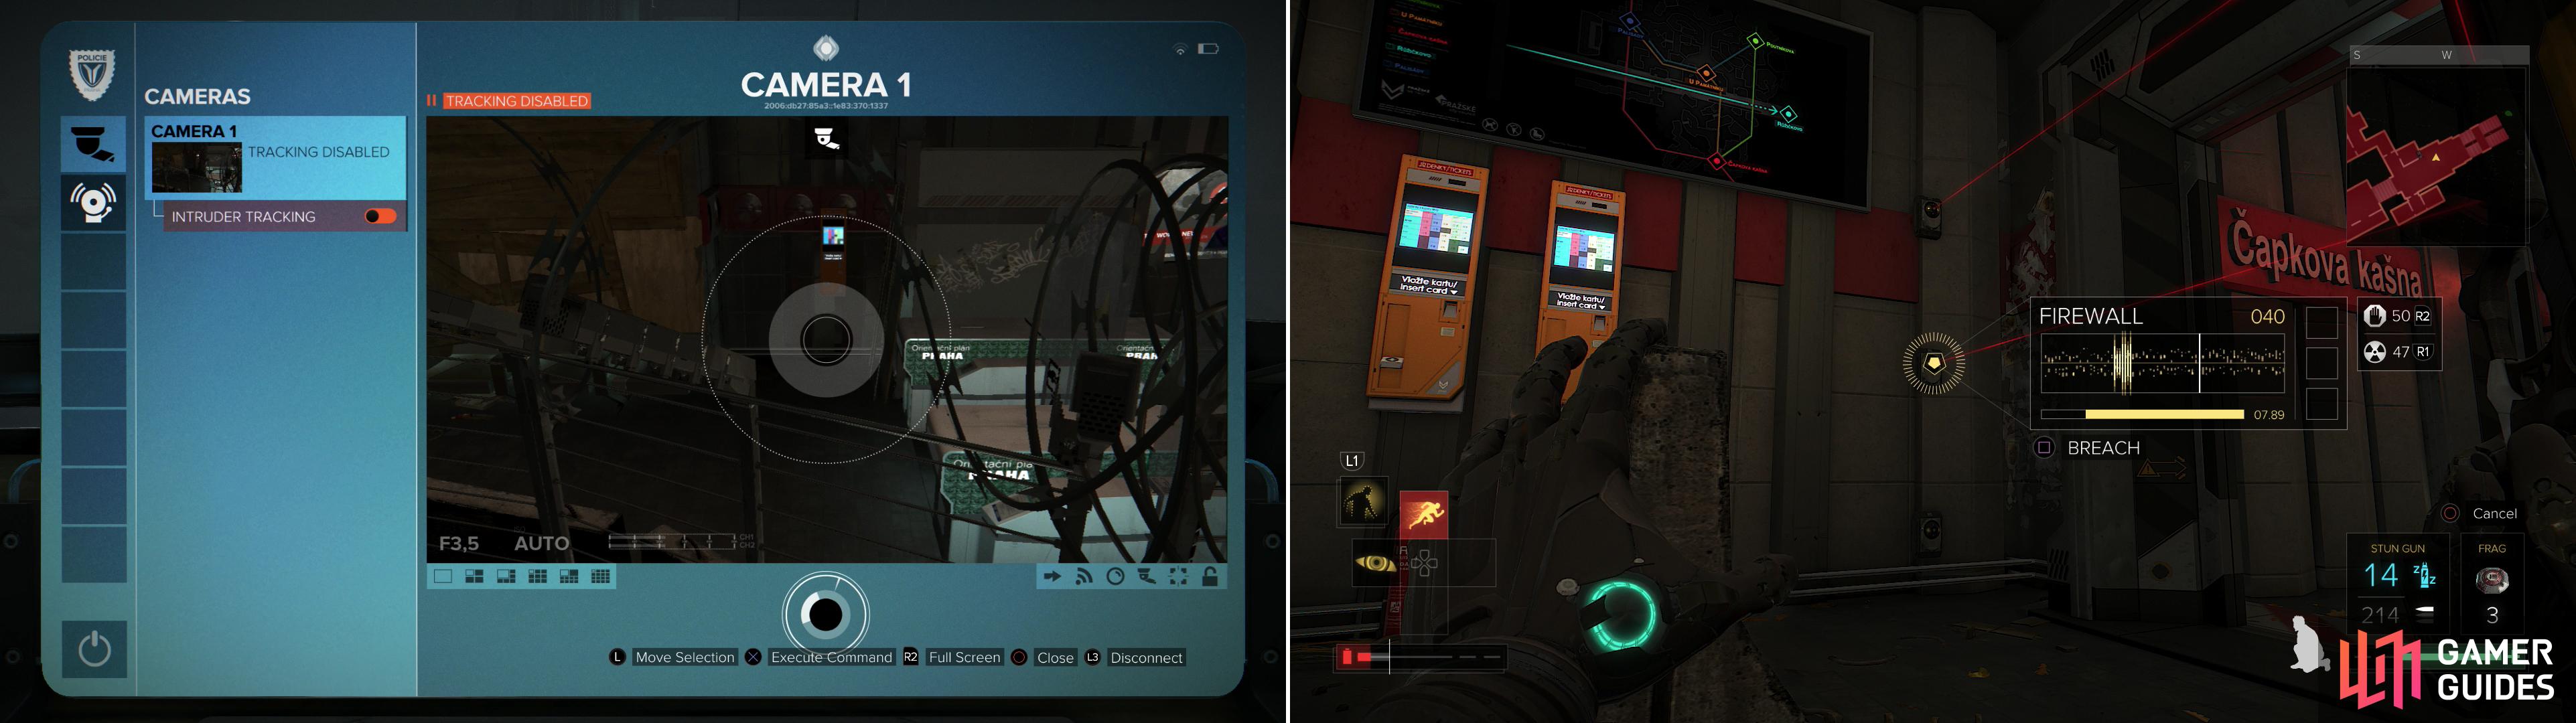 Hack a security computer and disable the camera in the Capek Station (left), and after you take down a guard, Remote Hack the laser grid to clear the way (right).